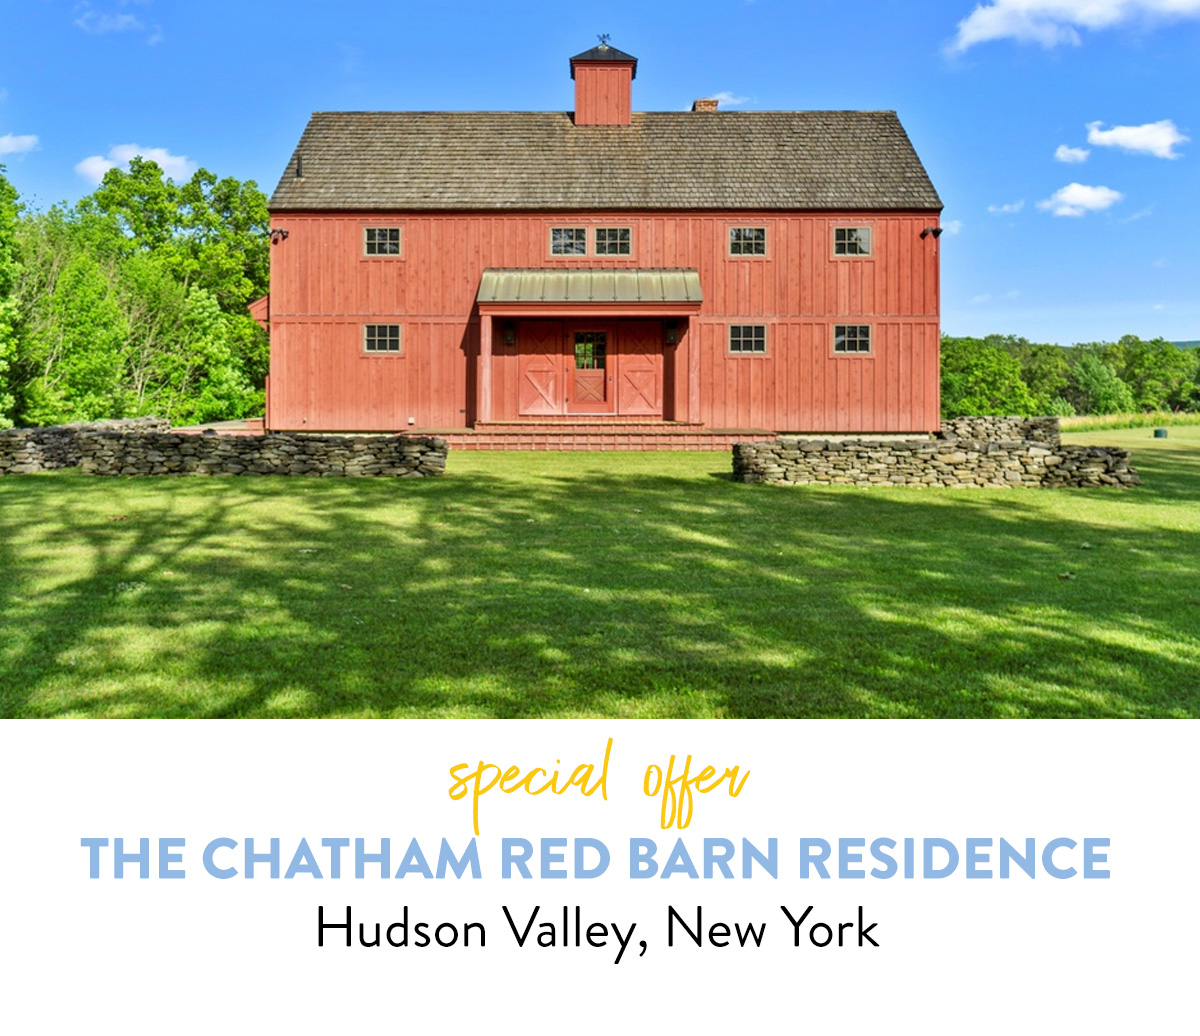 The Chatham Red Barn Residence